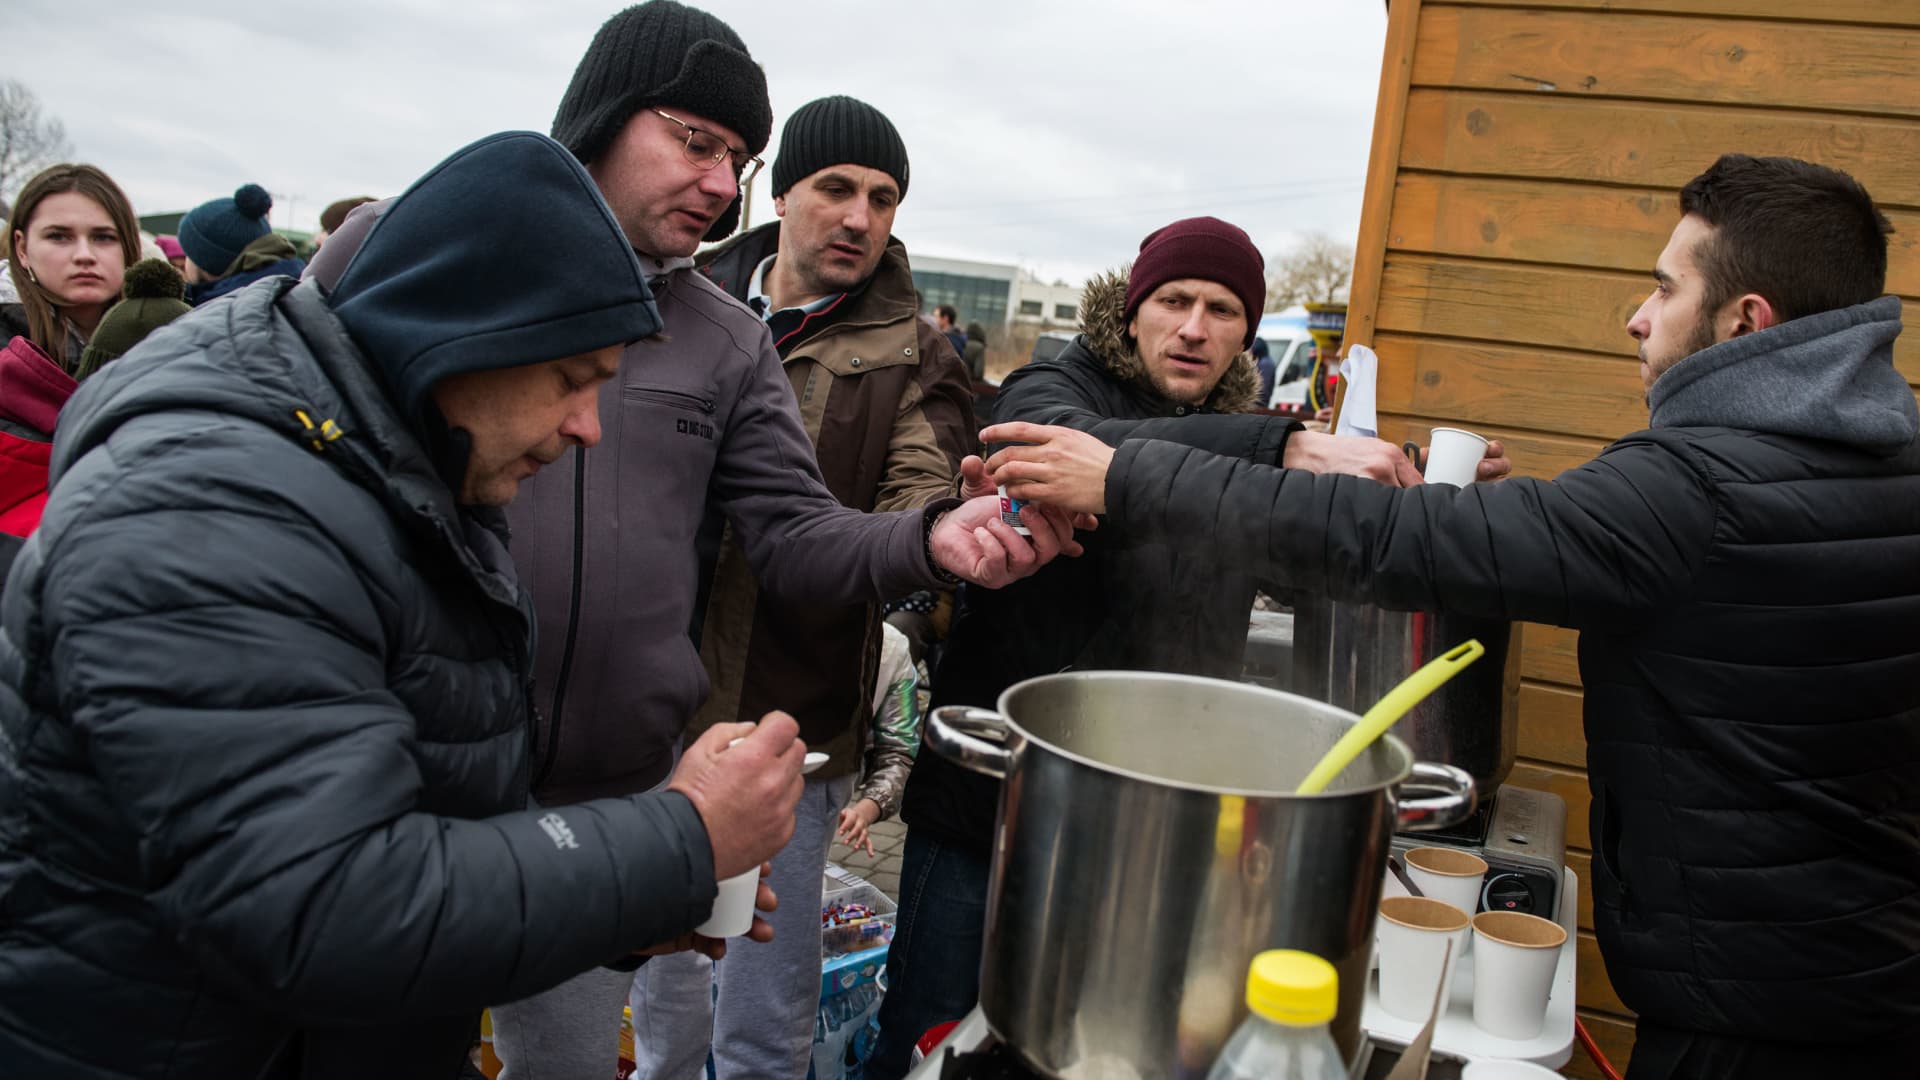 Ukrainian refugees are seen at the food distribution point at the border crossing in Medyka. Ukrainian refugees at the Medyka border crossing.